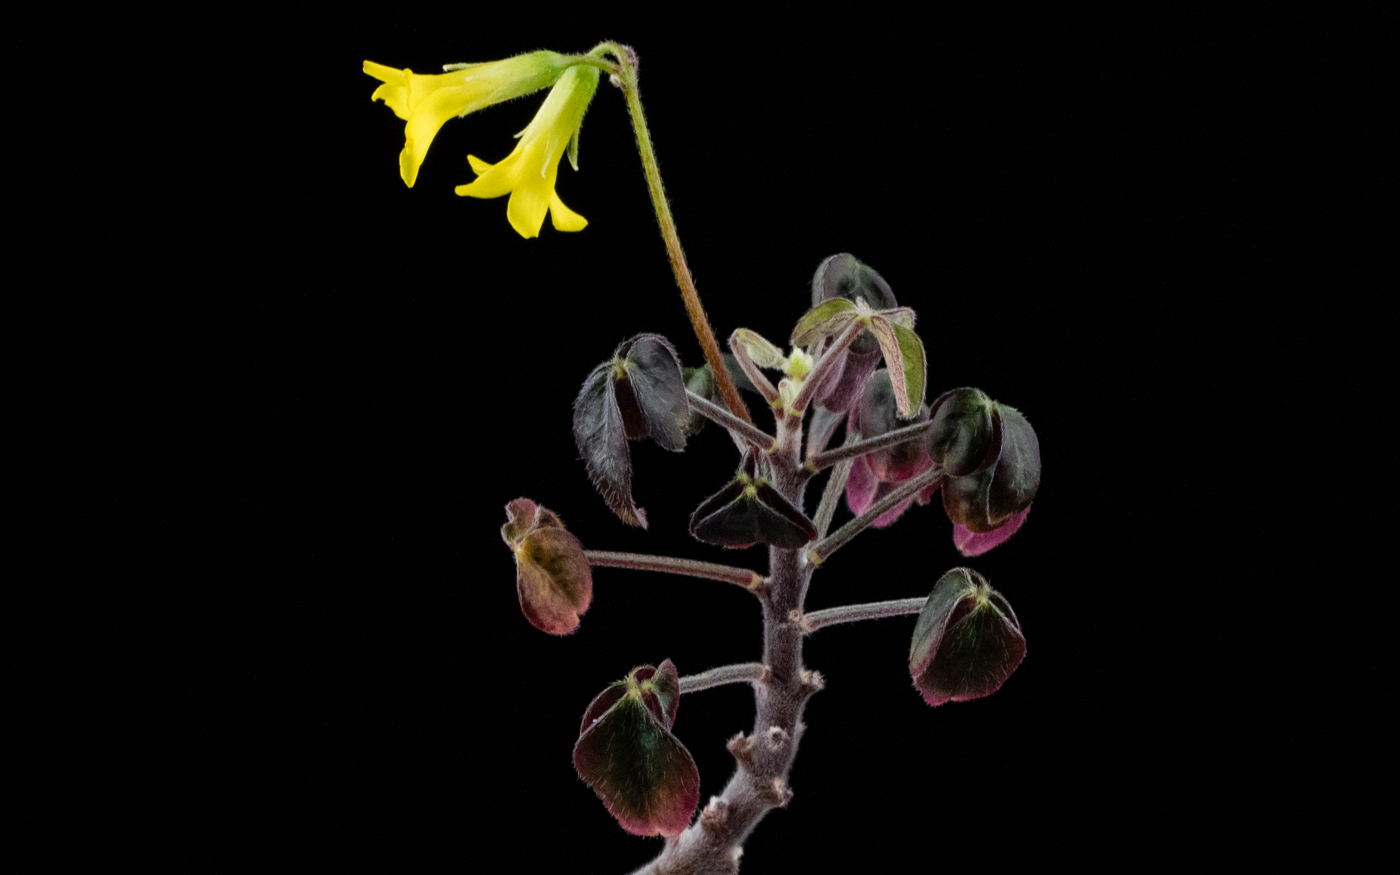 Oxalis sp. Ecuador Andes with yellow flowers